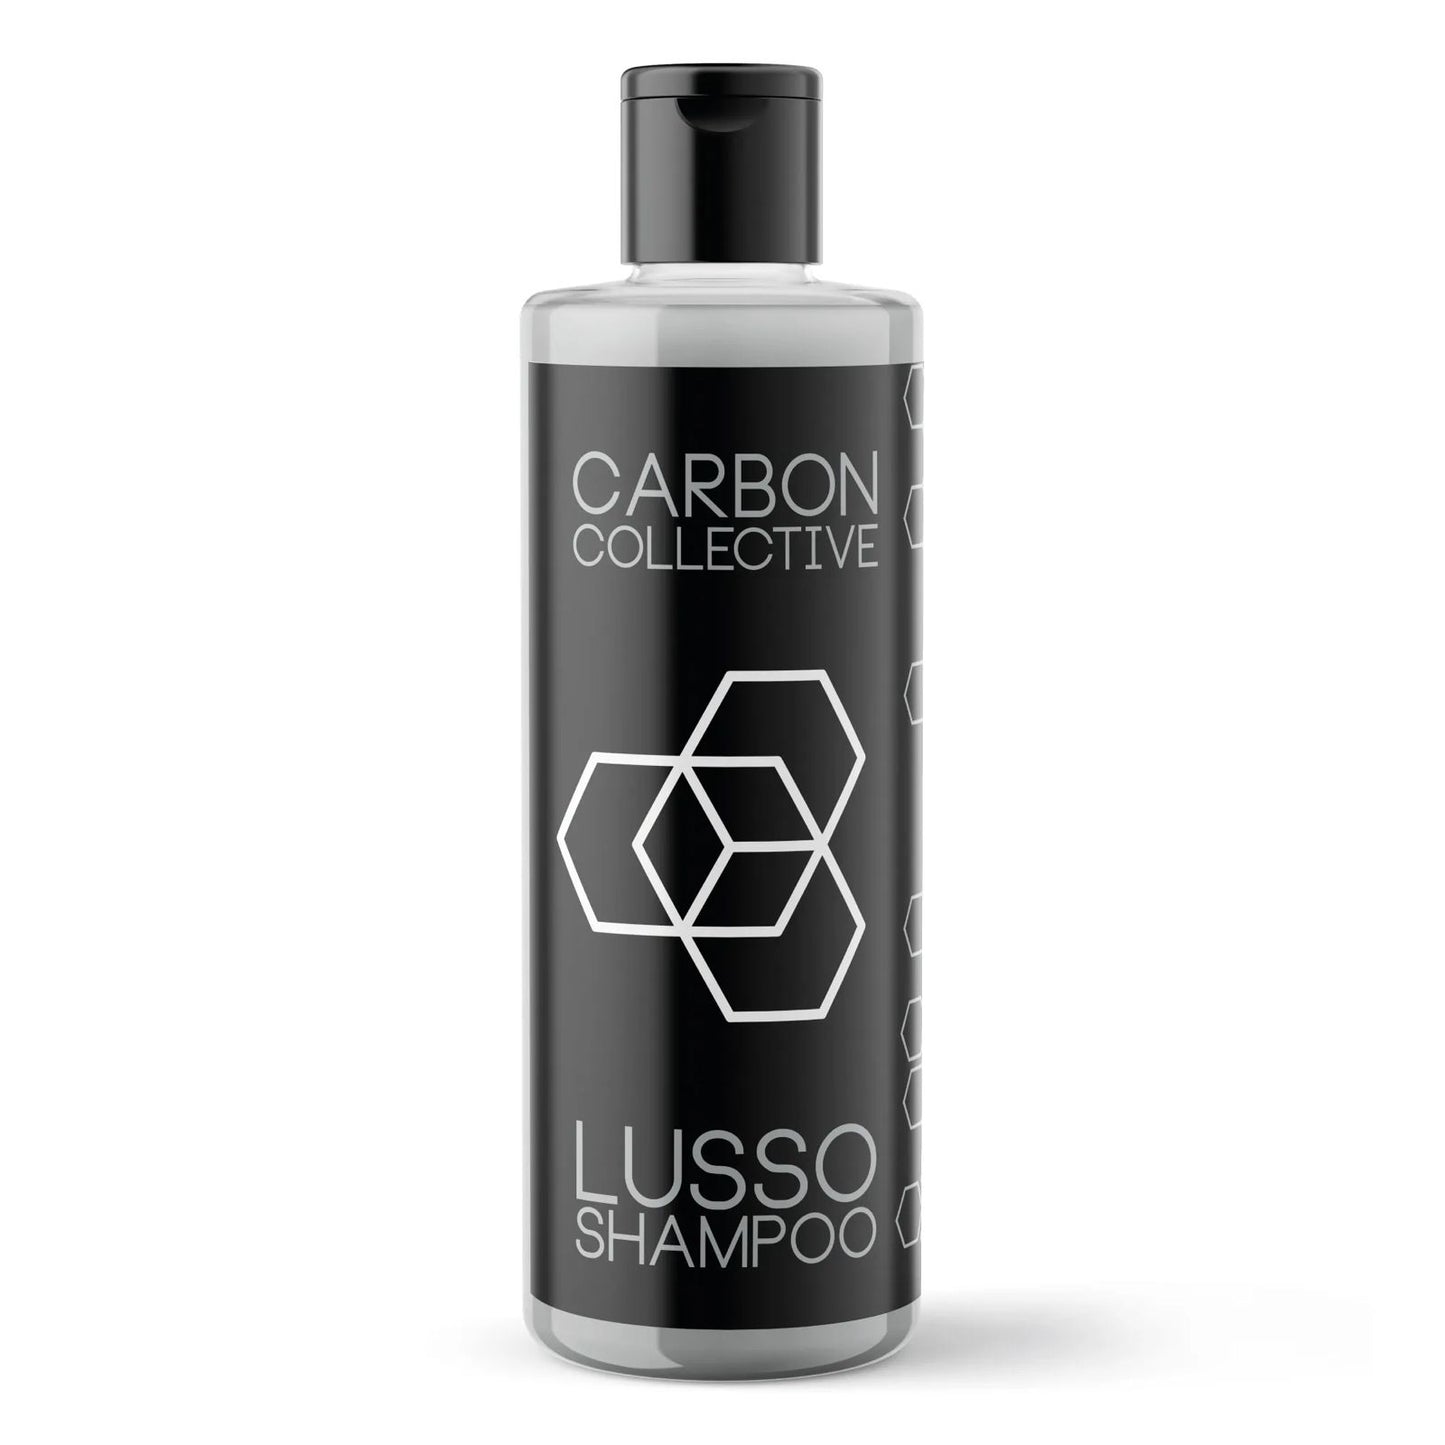 CARBON COLLECTIVE LUSSO SHAMPOO